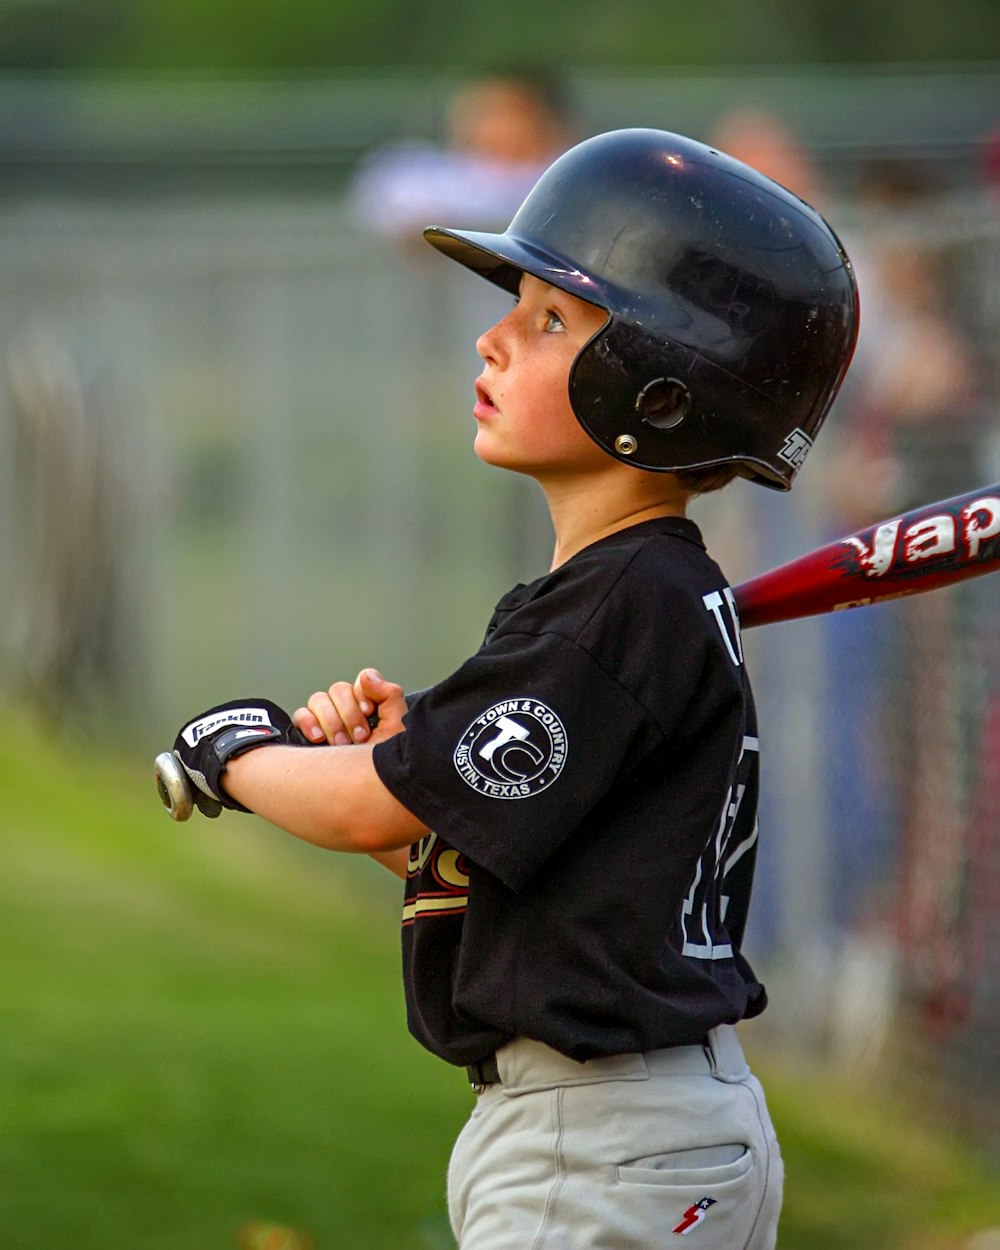 boy in black and white baseball jersey and helmet